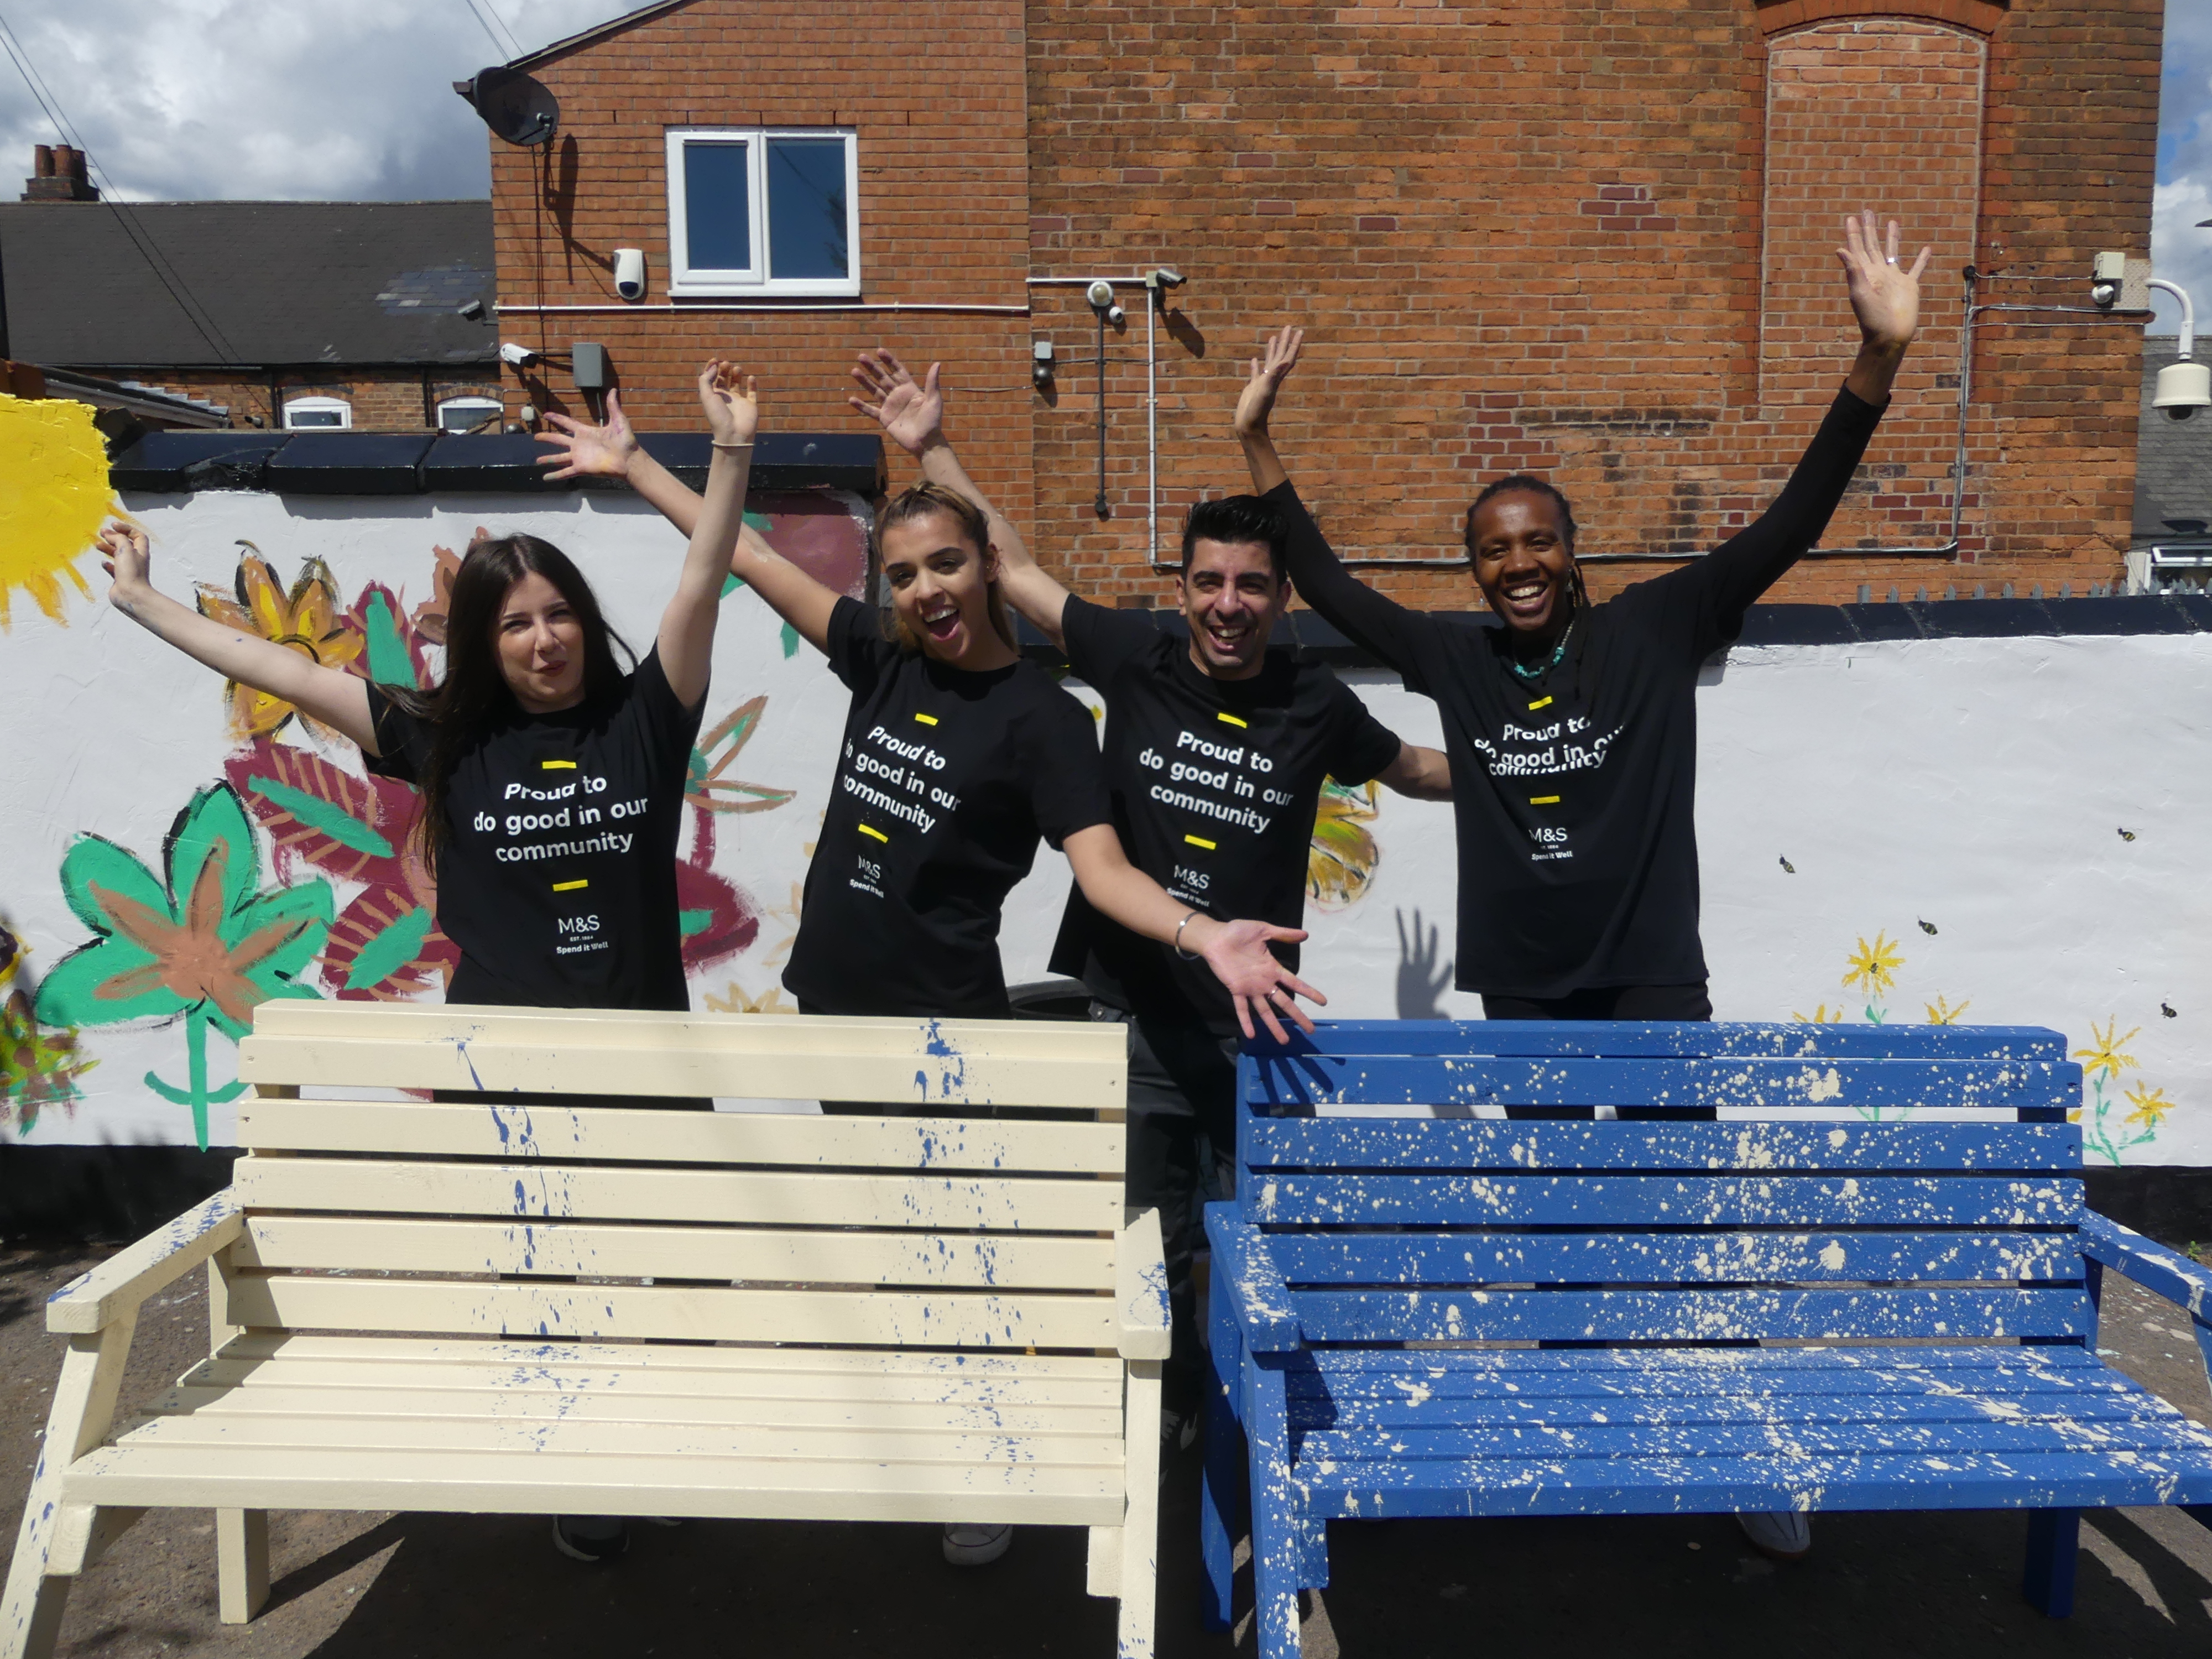 Volunteers posing in front of a newly painted a community mural and benches using cheap and recycled paint from Community RePaint Birmingham. The mural is of flowers and insects on a white background.